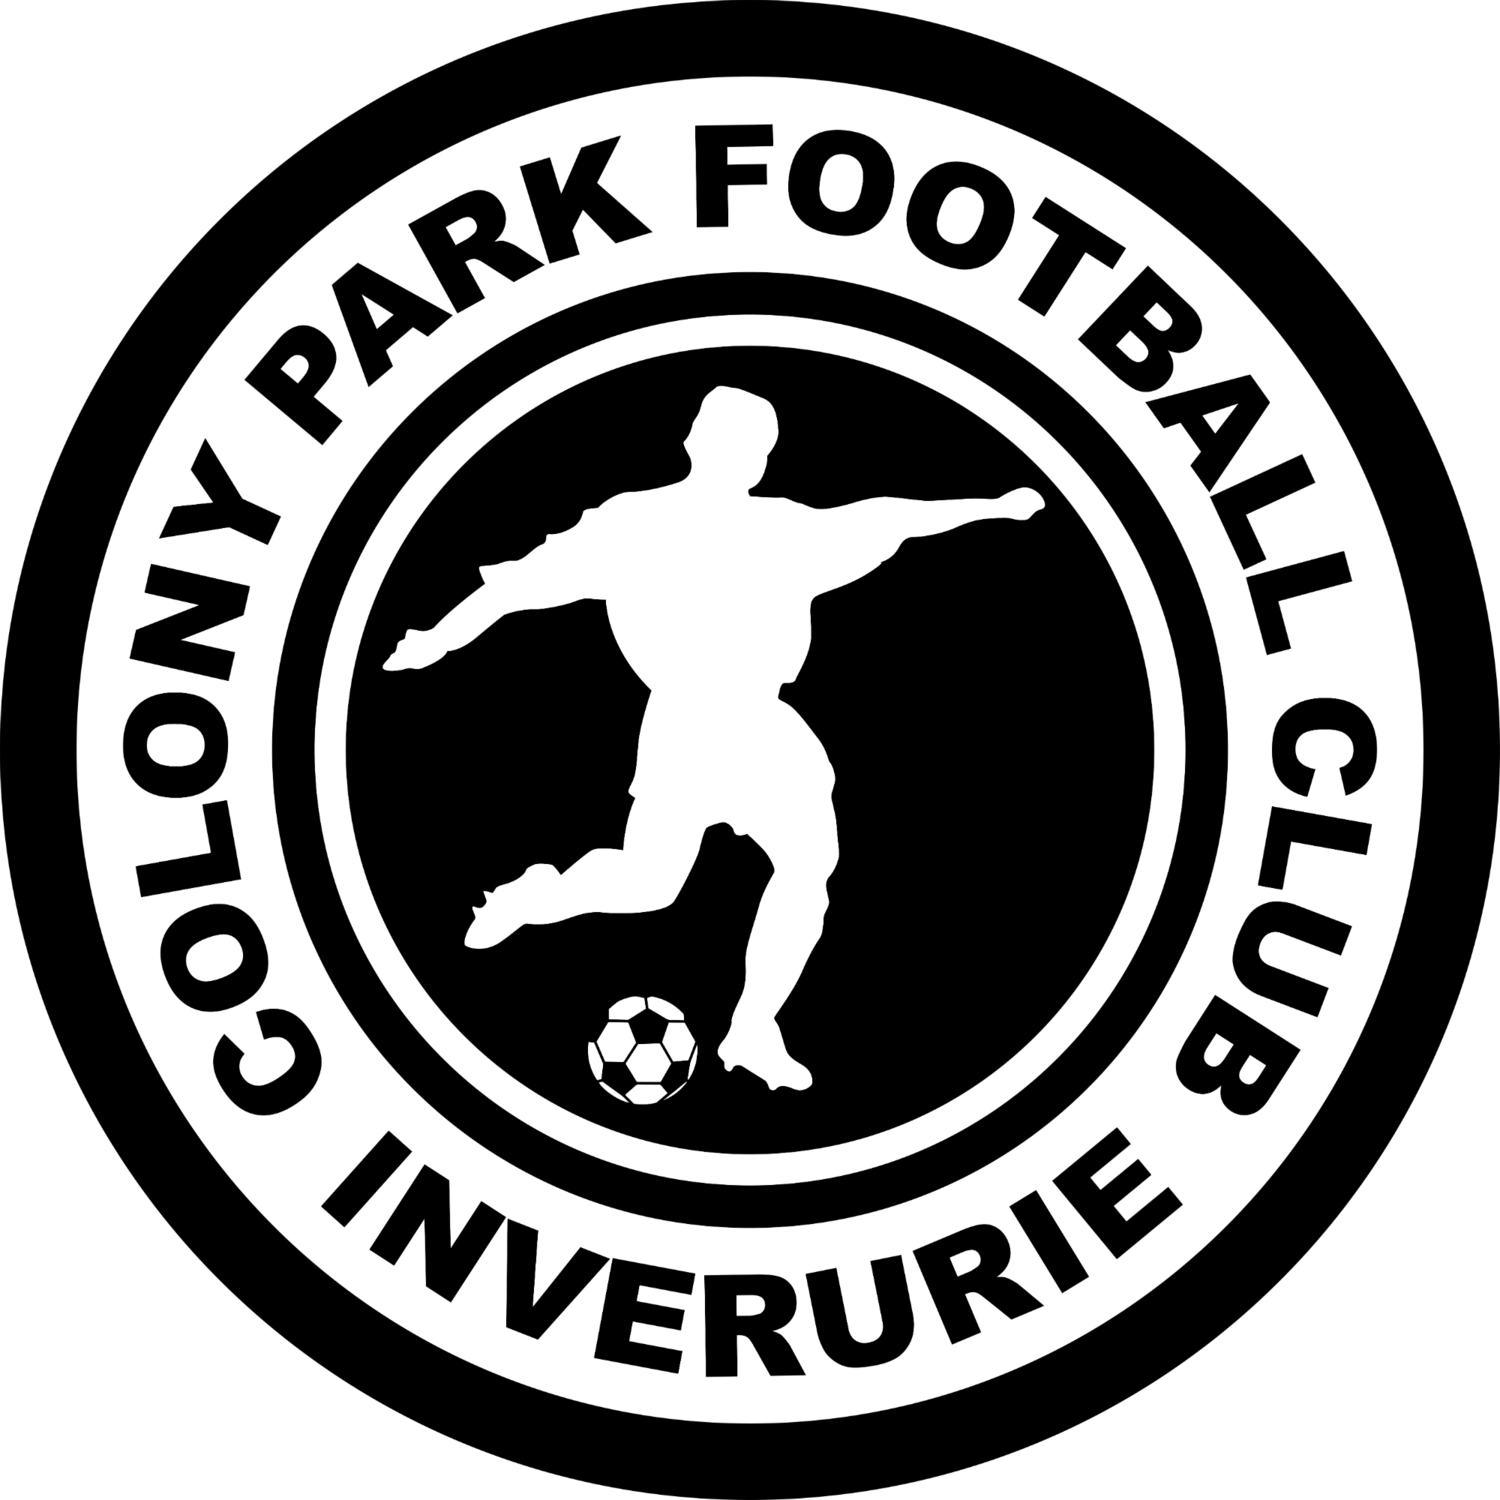 Charity of the month - Colony Park Football Club